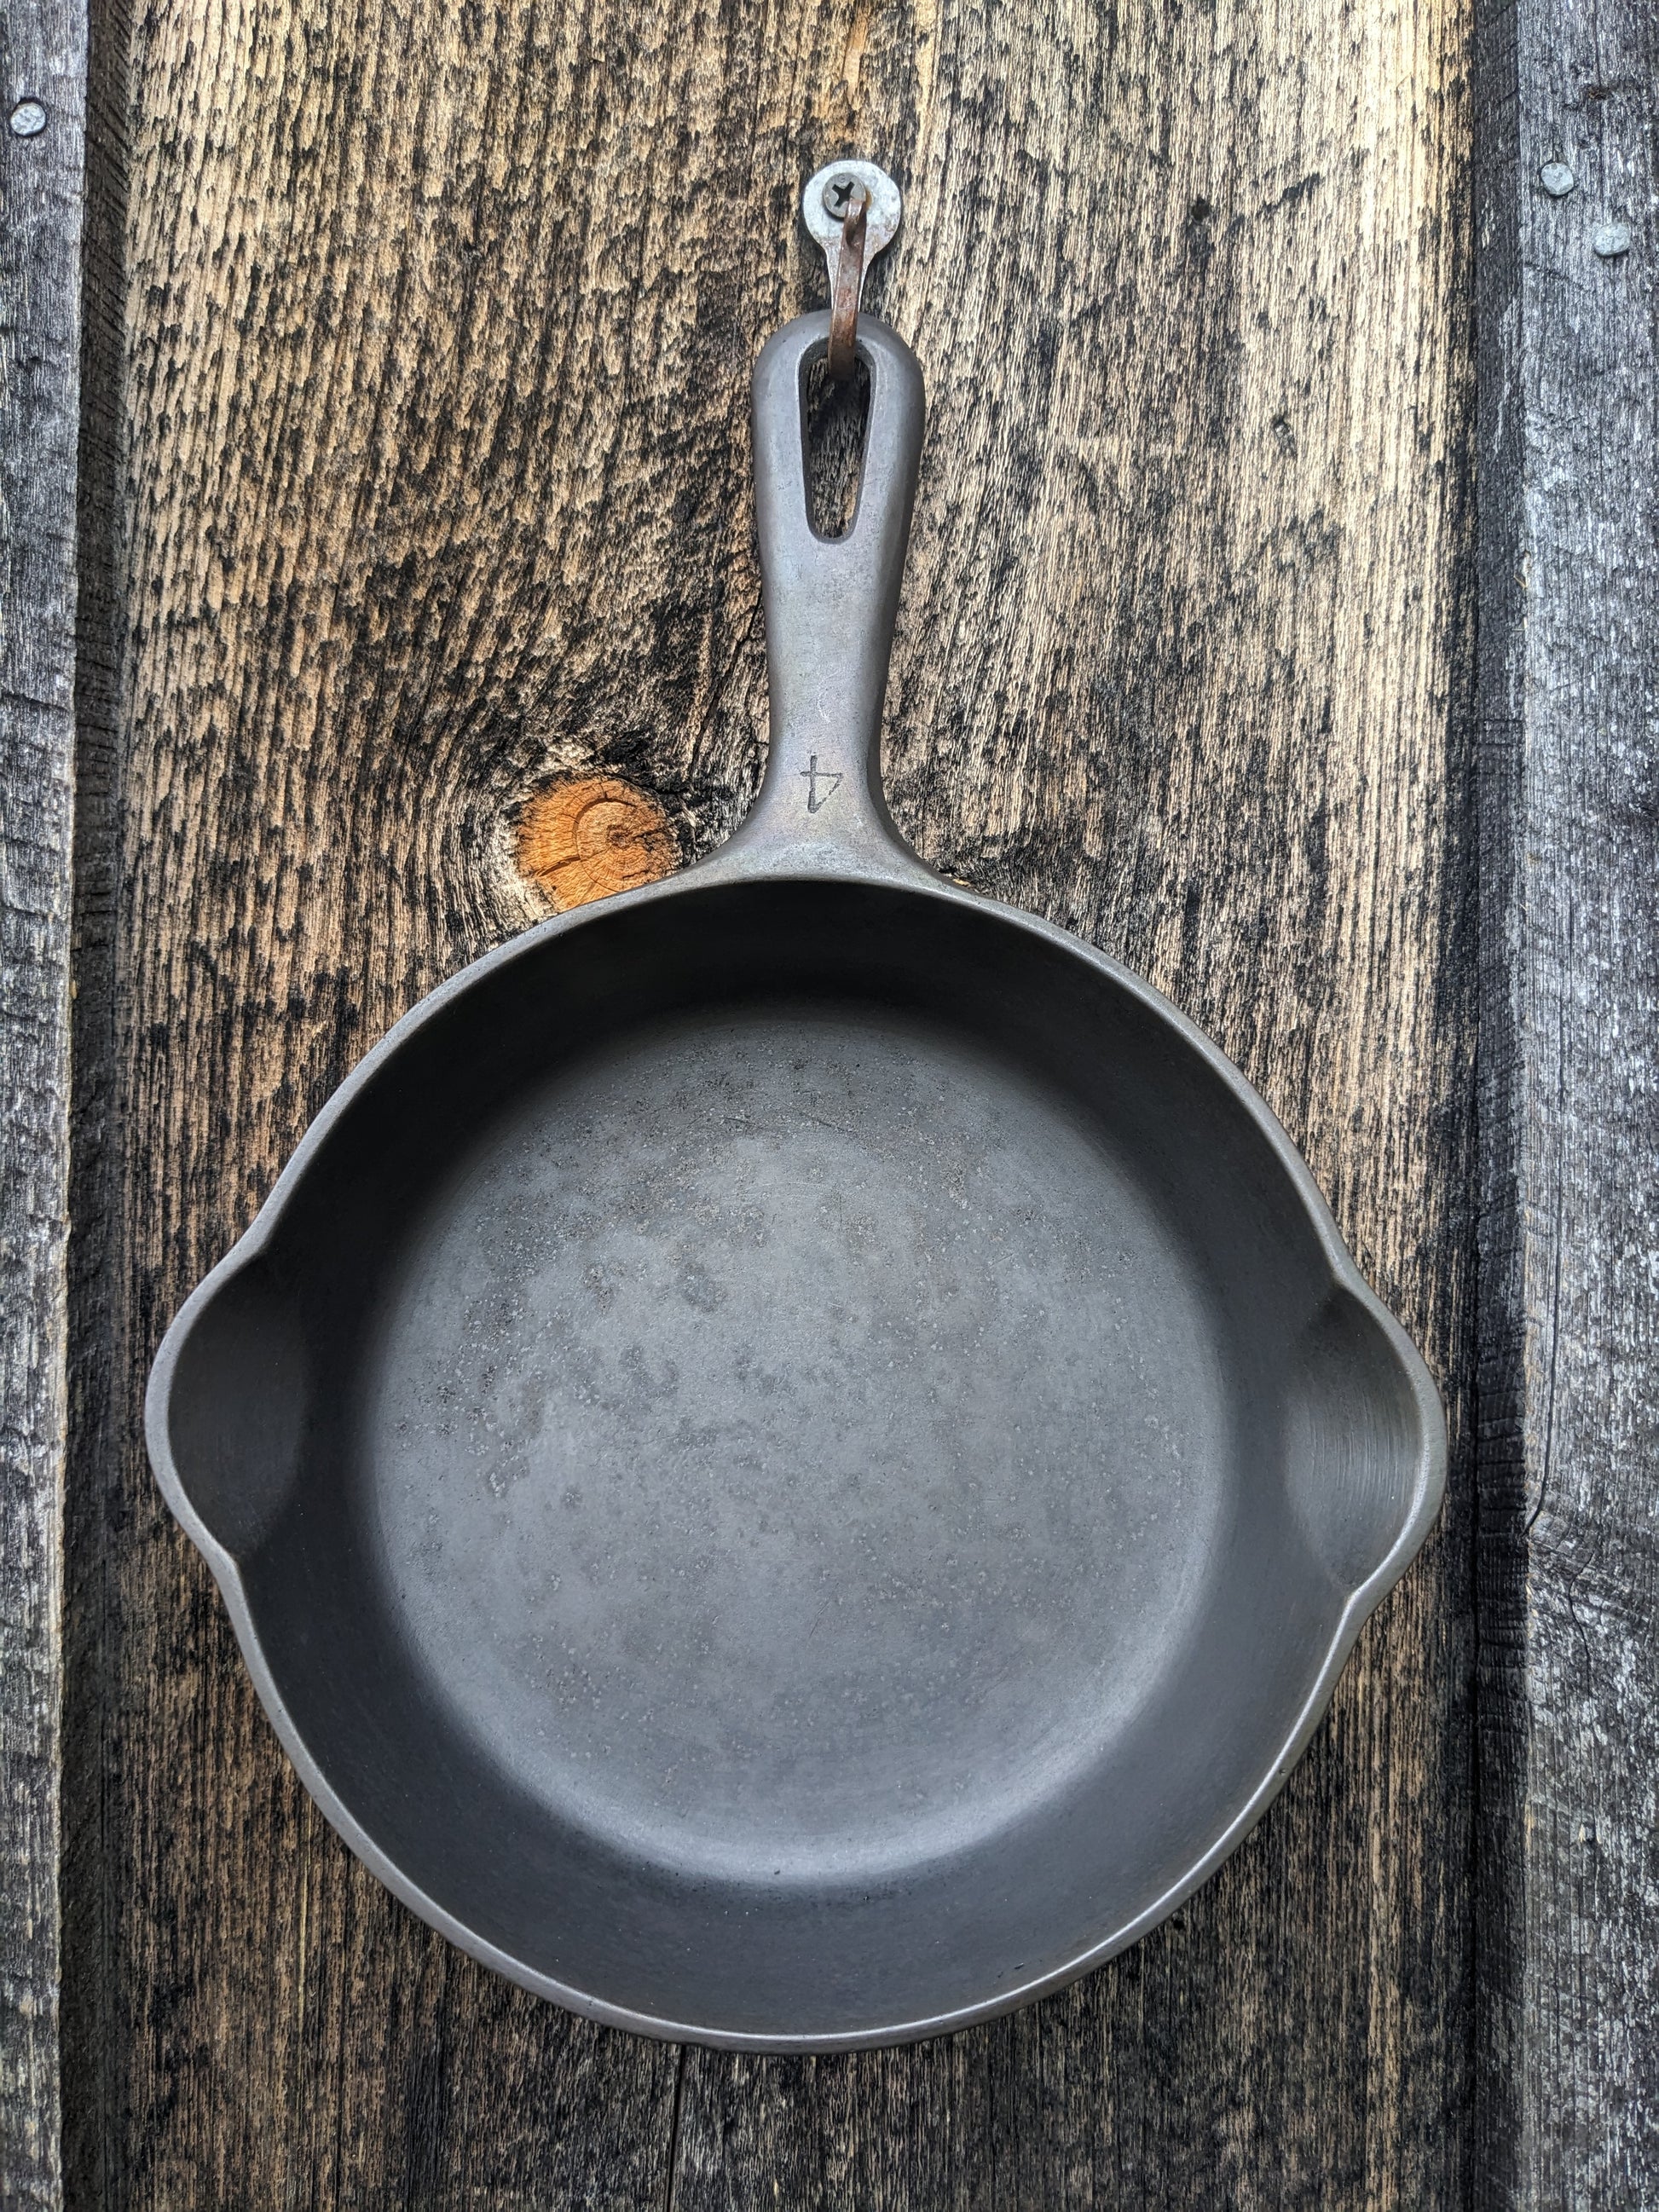 Small cast iron skillet and griddle - Lil Dusty Online Auctions - All  Estate Services, LLC